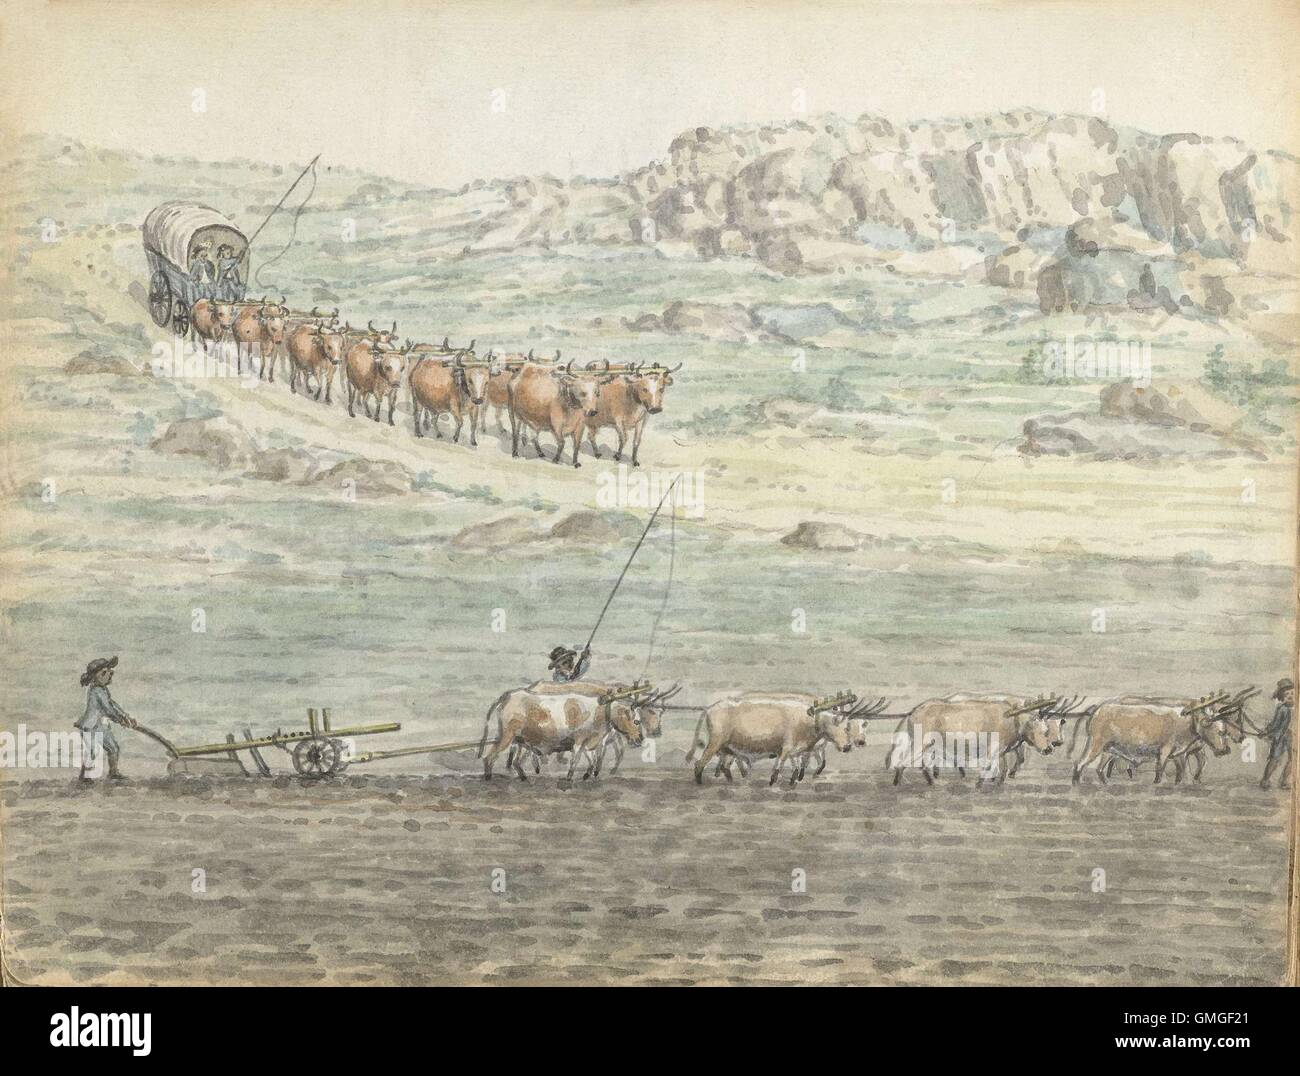 Ox-Span for Covered Wagon and Plow, by Jan Brandes, 1806, Dutch Colonial painting, drawing, paper pencil, brush. 12 oxen drawing a cart and 8 pull a plow on a Dutch settler's farm in Lochner, South Africa (BSLOC 2016 6 318) Stock Photo